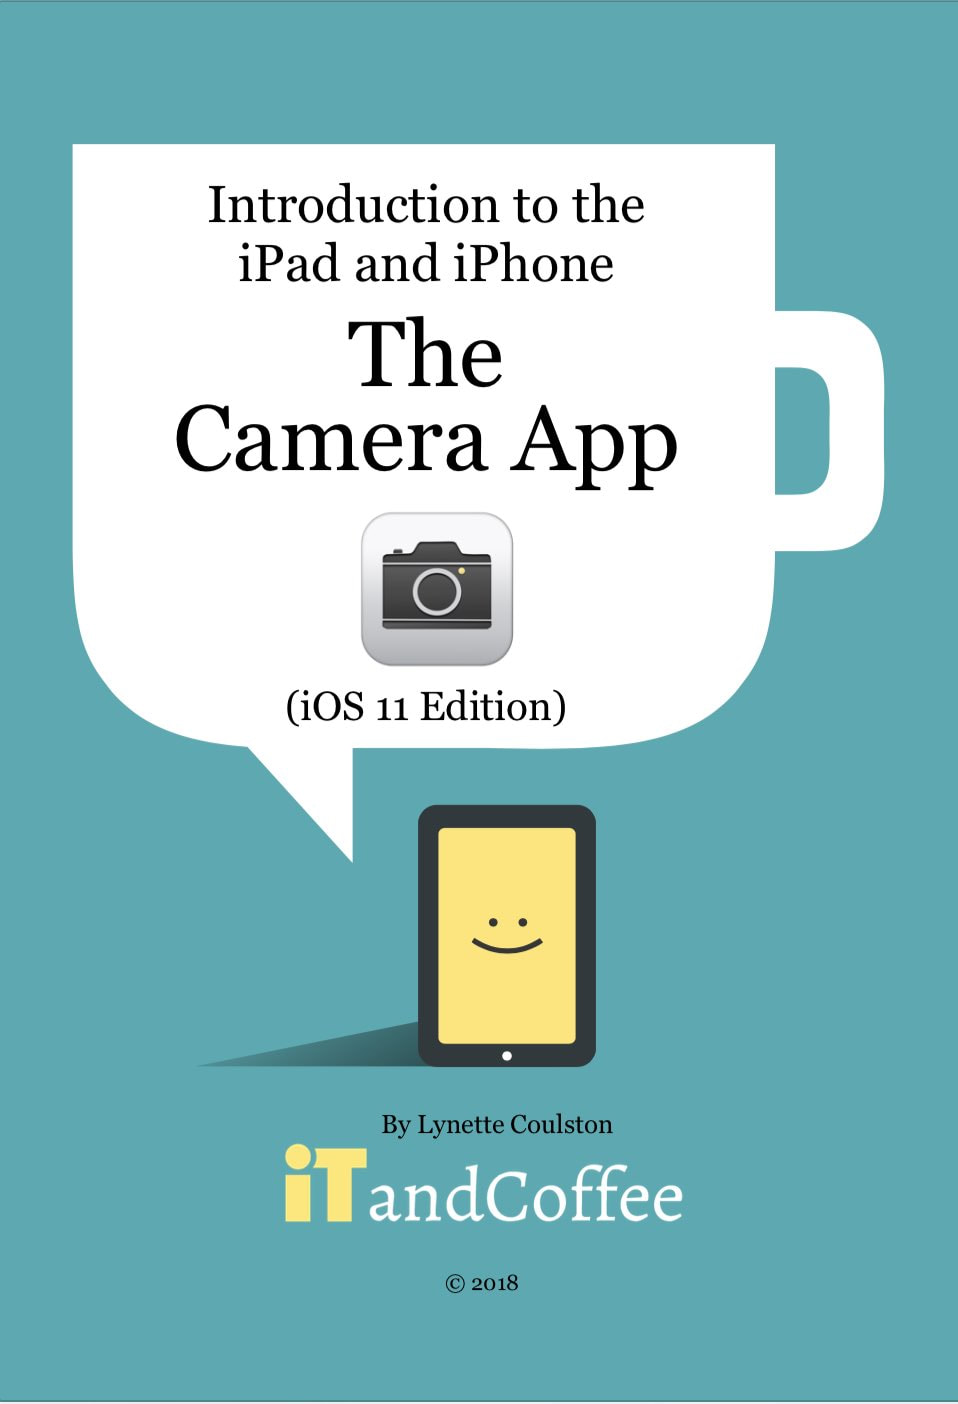 A guide to the Camera app on the iPad and iPhone